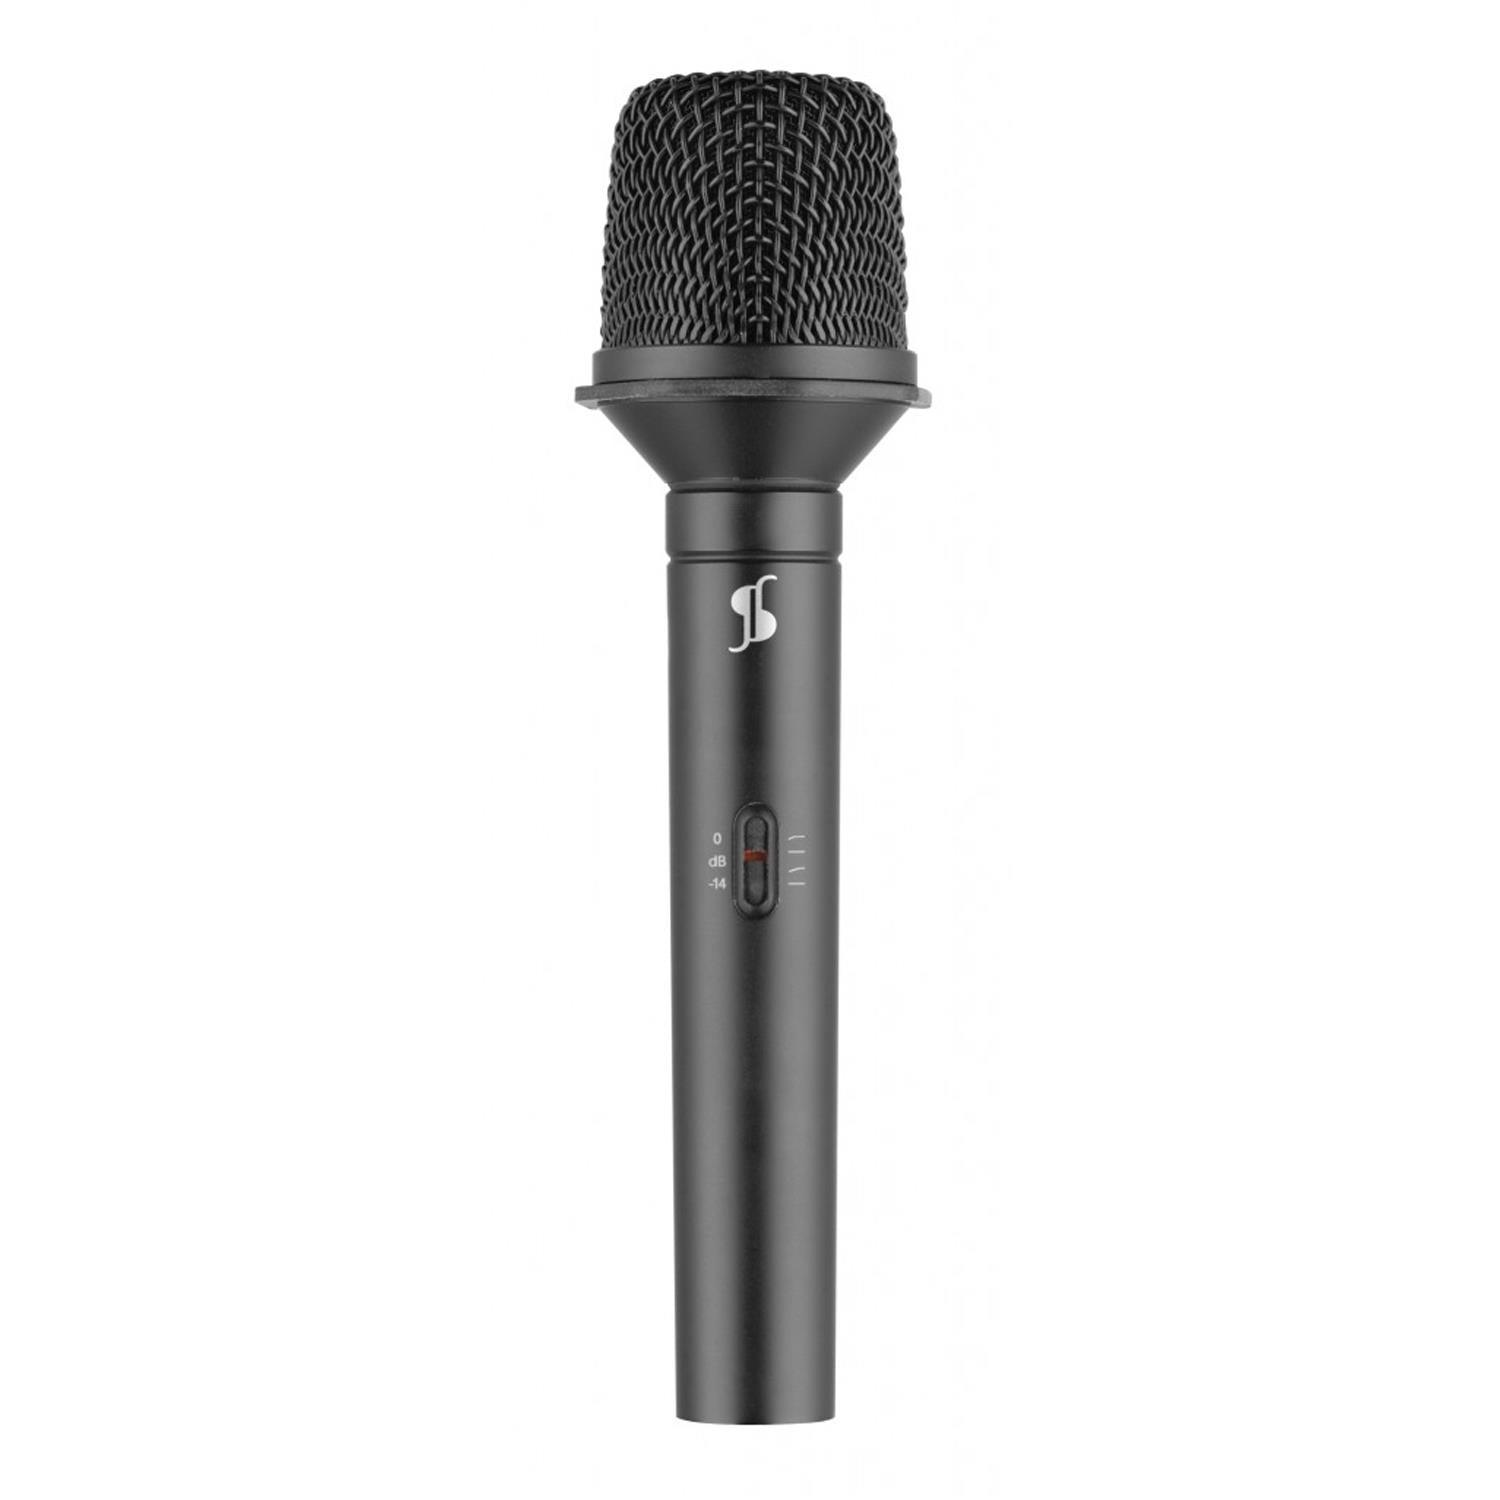 Stagg SCM300 Cardioid Electret Condenser Microphone - DY Pro Audio